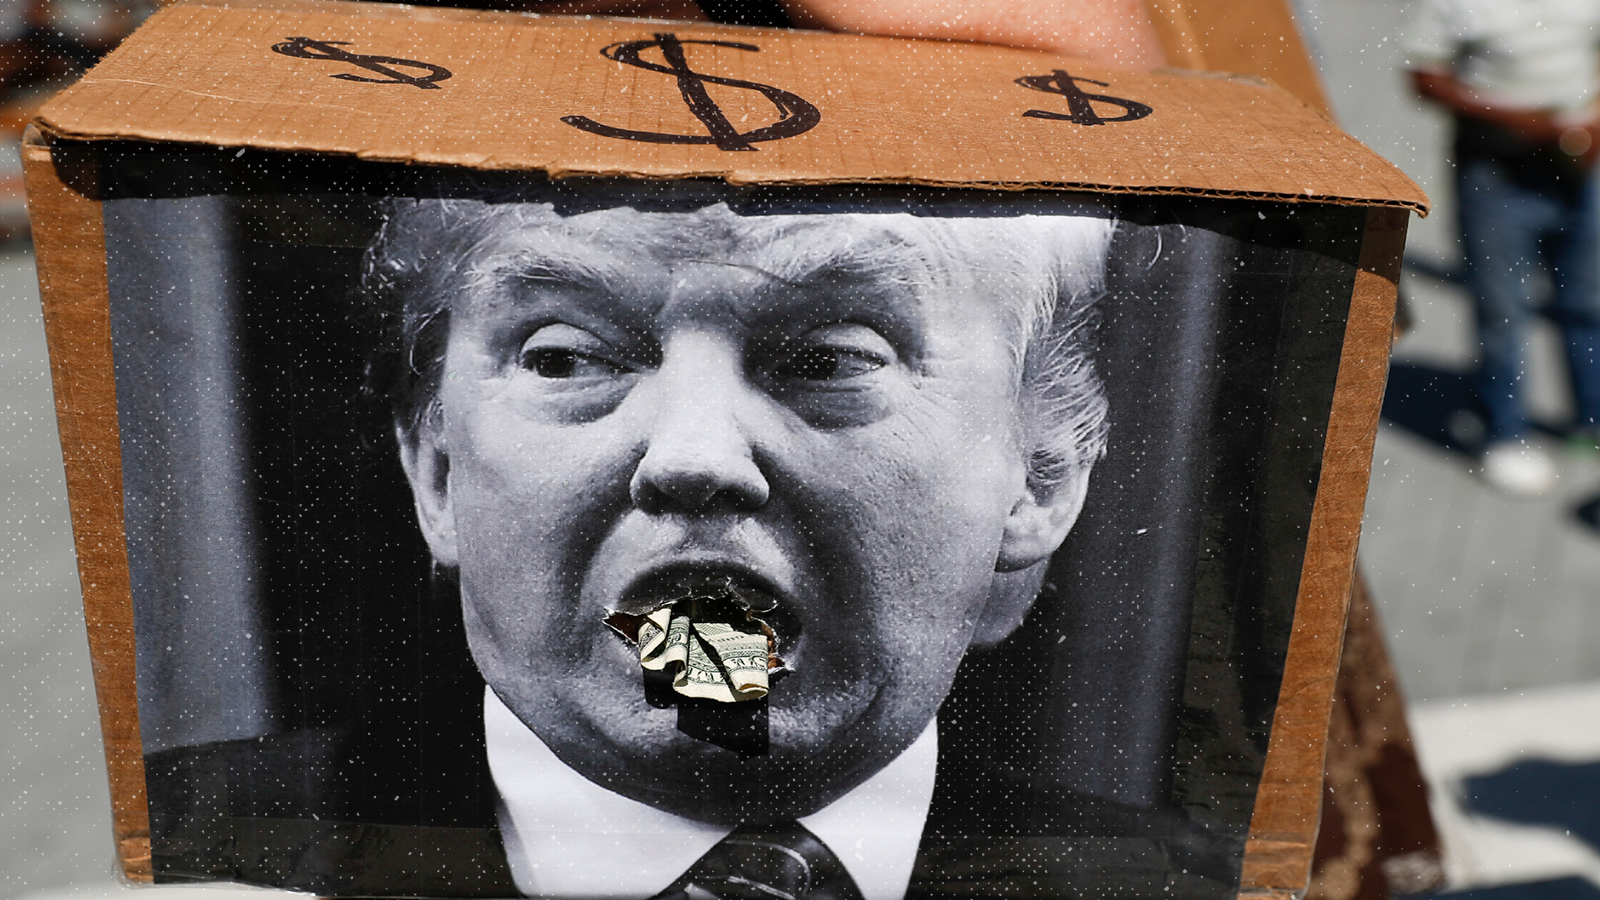 A satirical image of Donald Trump with money coming out of his mouth is pasted on top of a box covered in dollar signs.